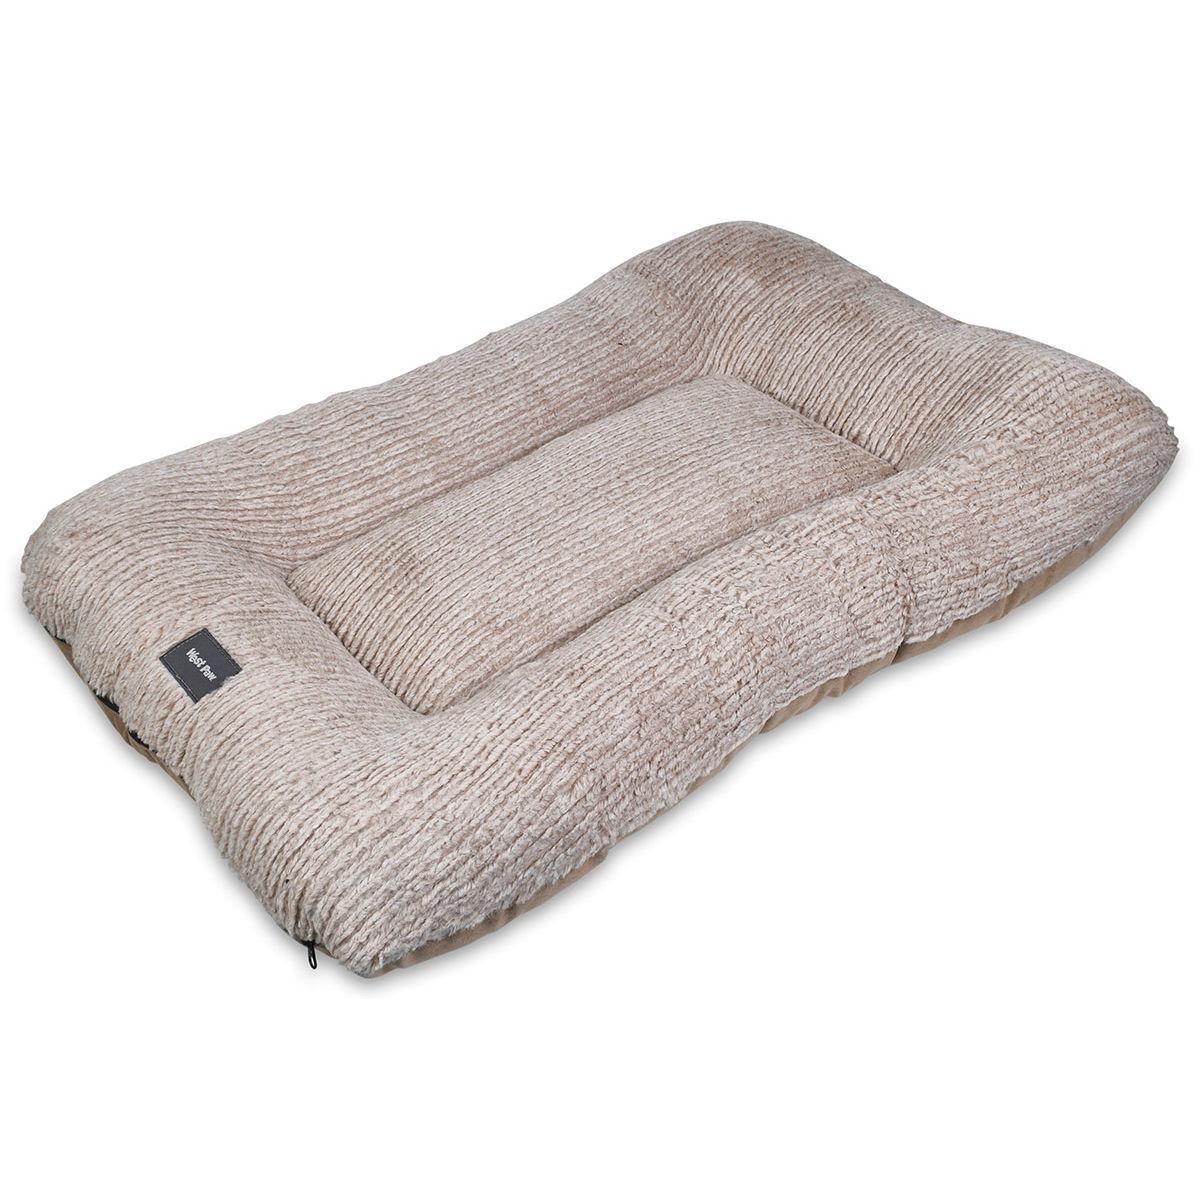 West Paw Heyday Dog Bed - Oatmeal Heather